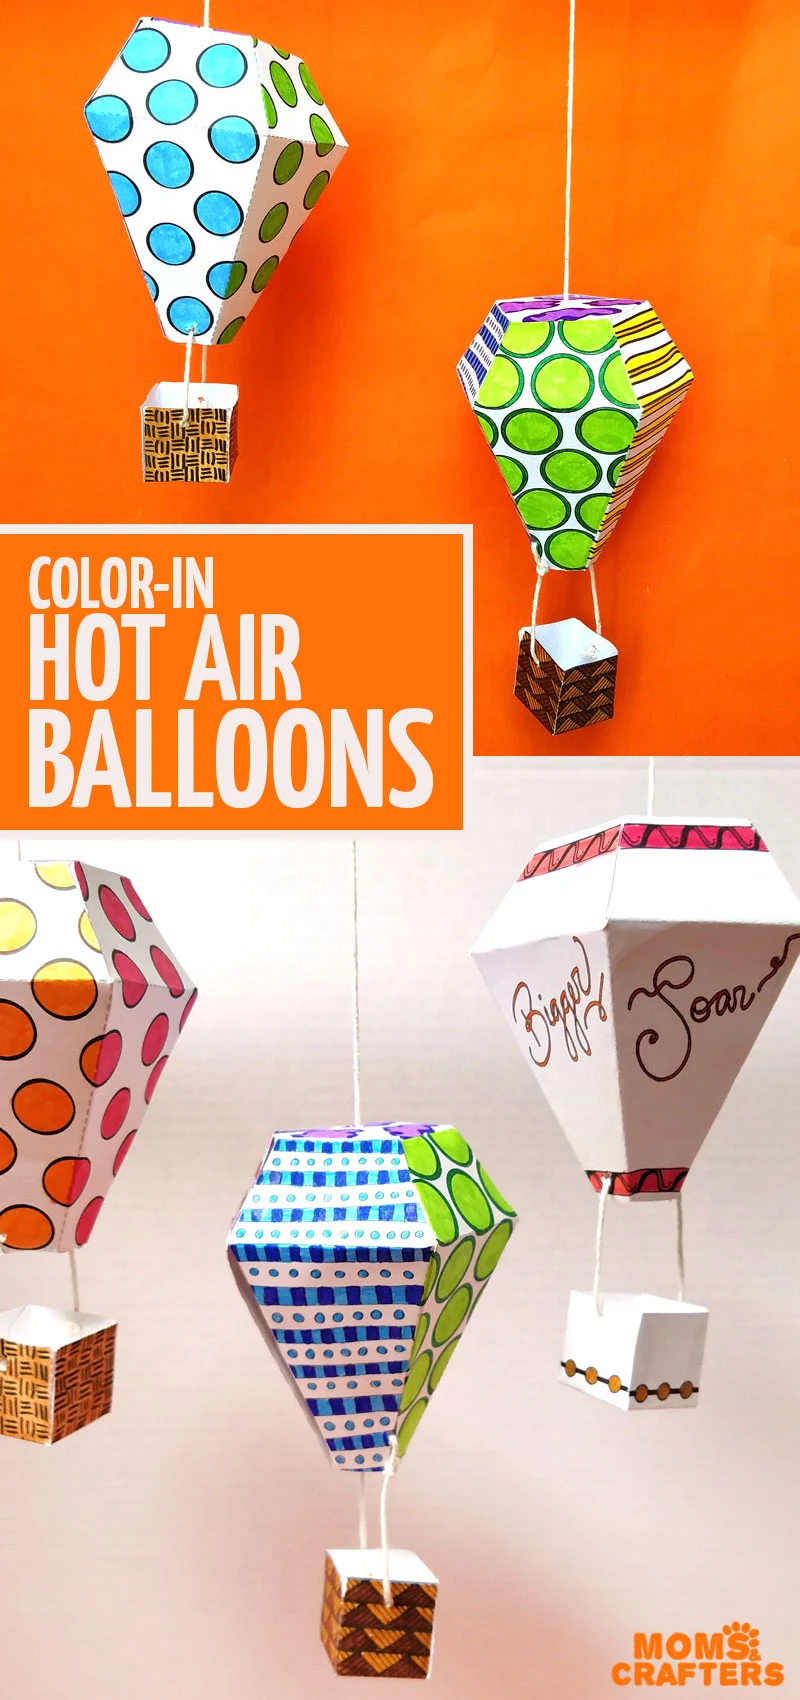 Click to grab these cool color-in hot air balloon mobiles! Includes a FREE PRINTABLE sample coloring page for adults - this is a cool paper craft nursery or playroom decor idea #papercrafts #adultcoloring #diy